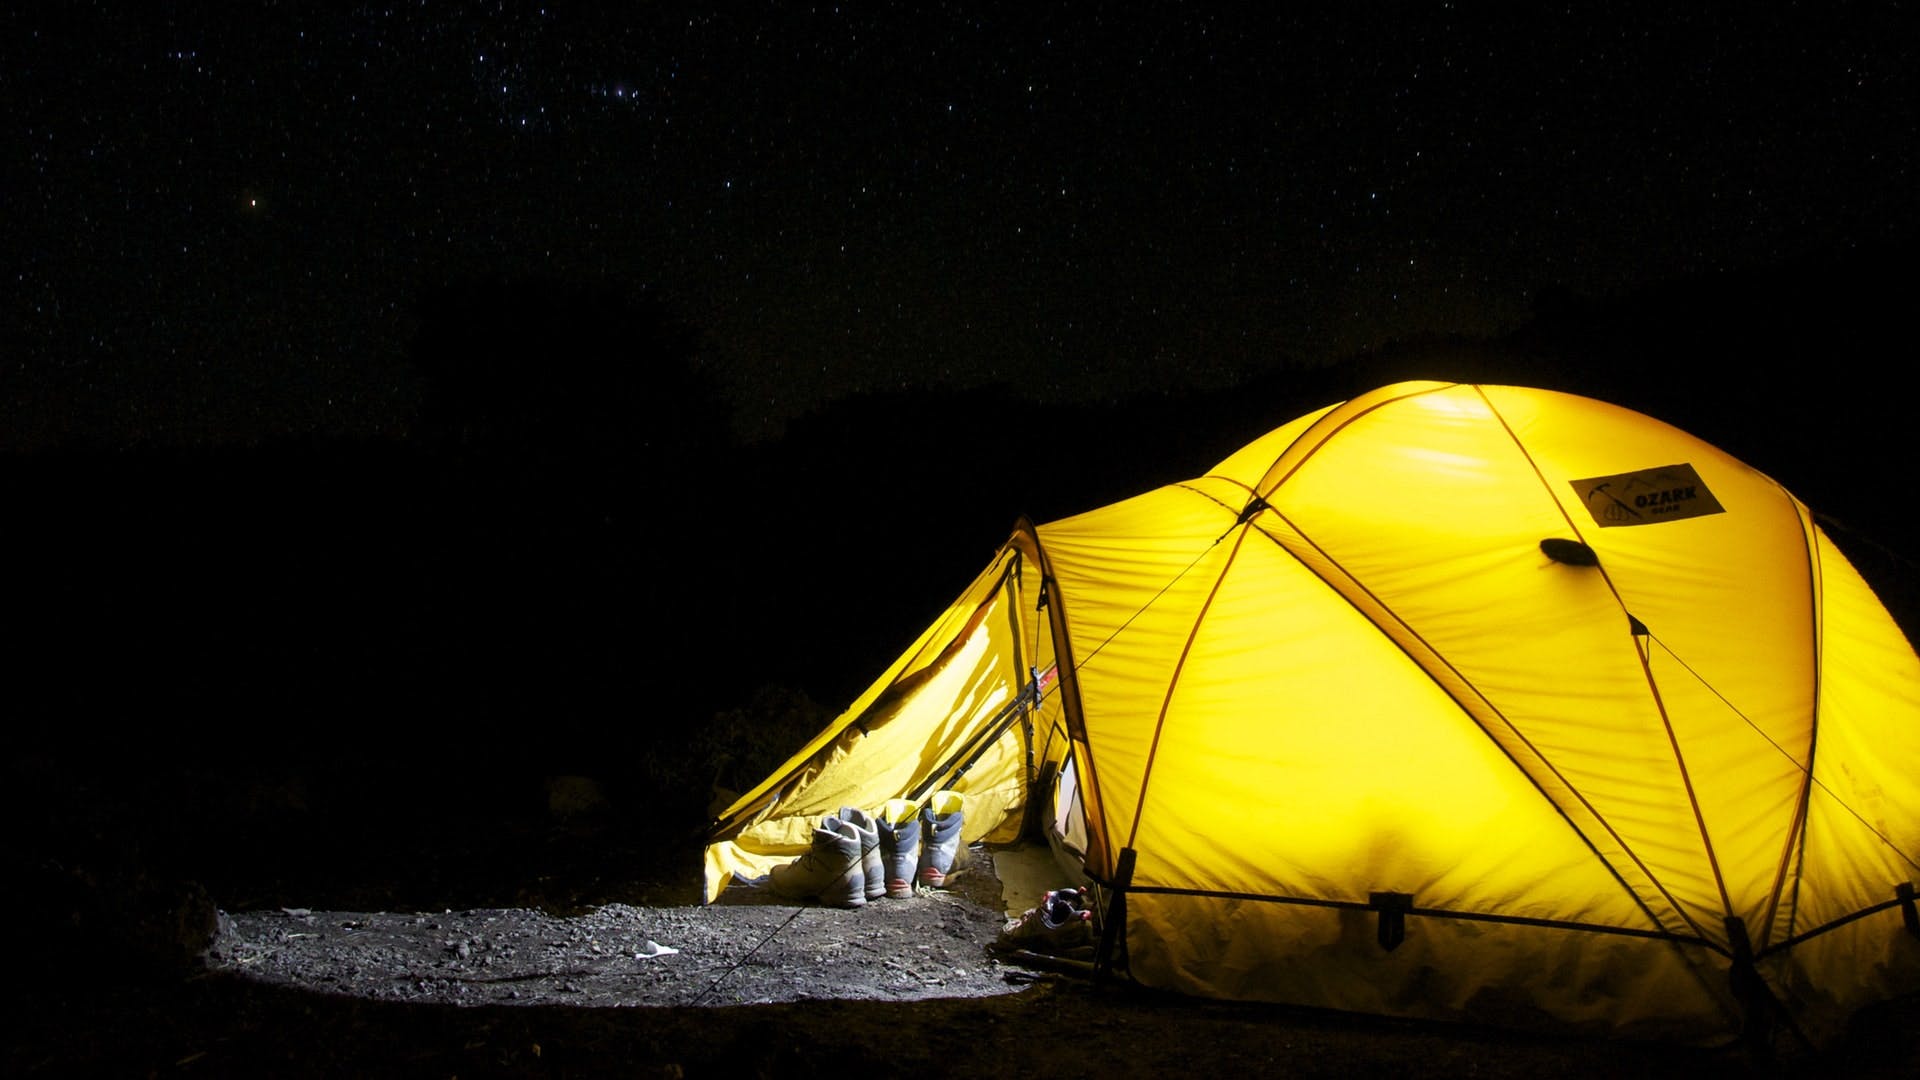 Yellow,Tent,Night,Light,Lighting,Biome,Camping,Sky,Tints and shades,Landscape